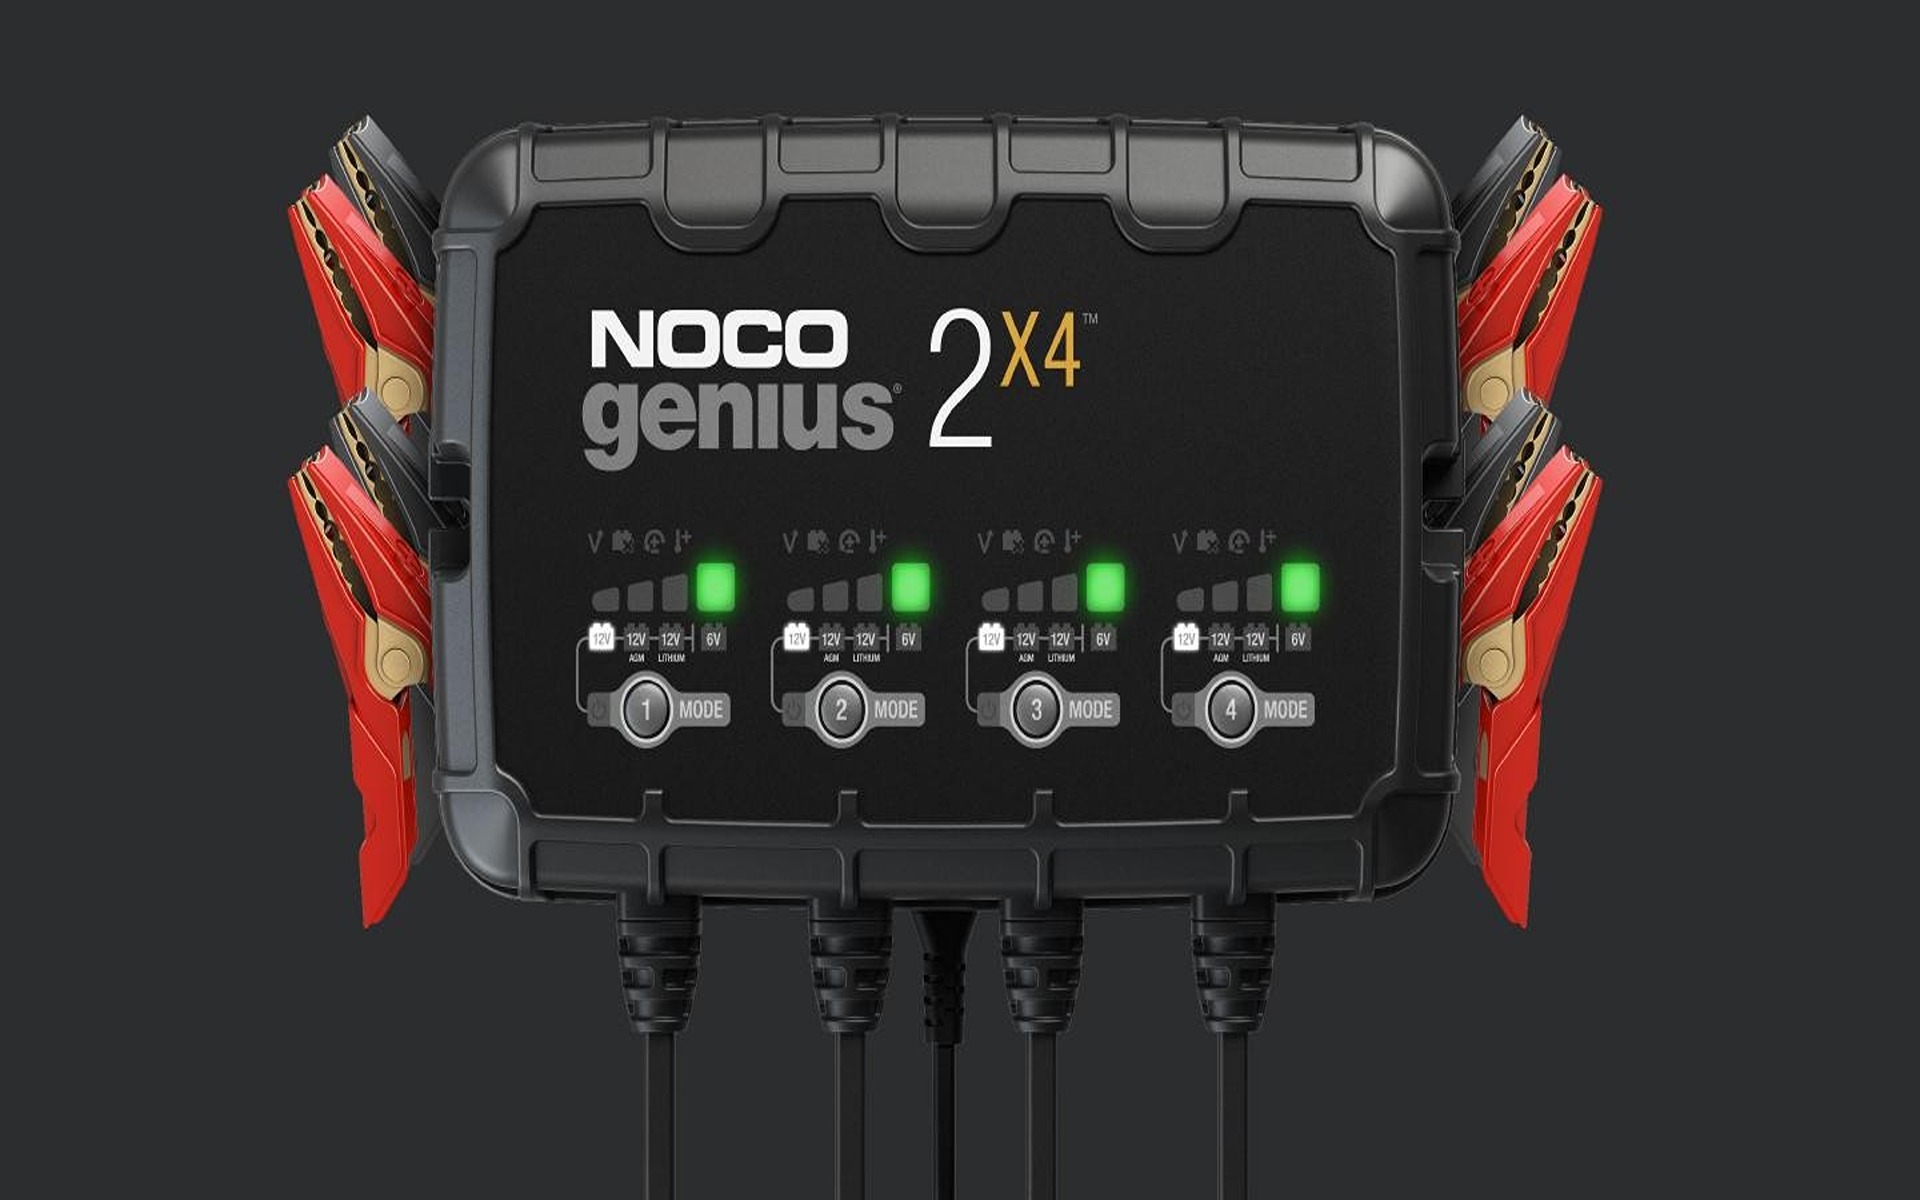 GENIUS 2X4, 4-Bank, 8-Amp Fully-Automatic Smart Charger